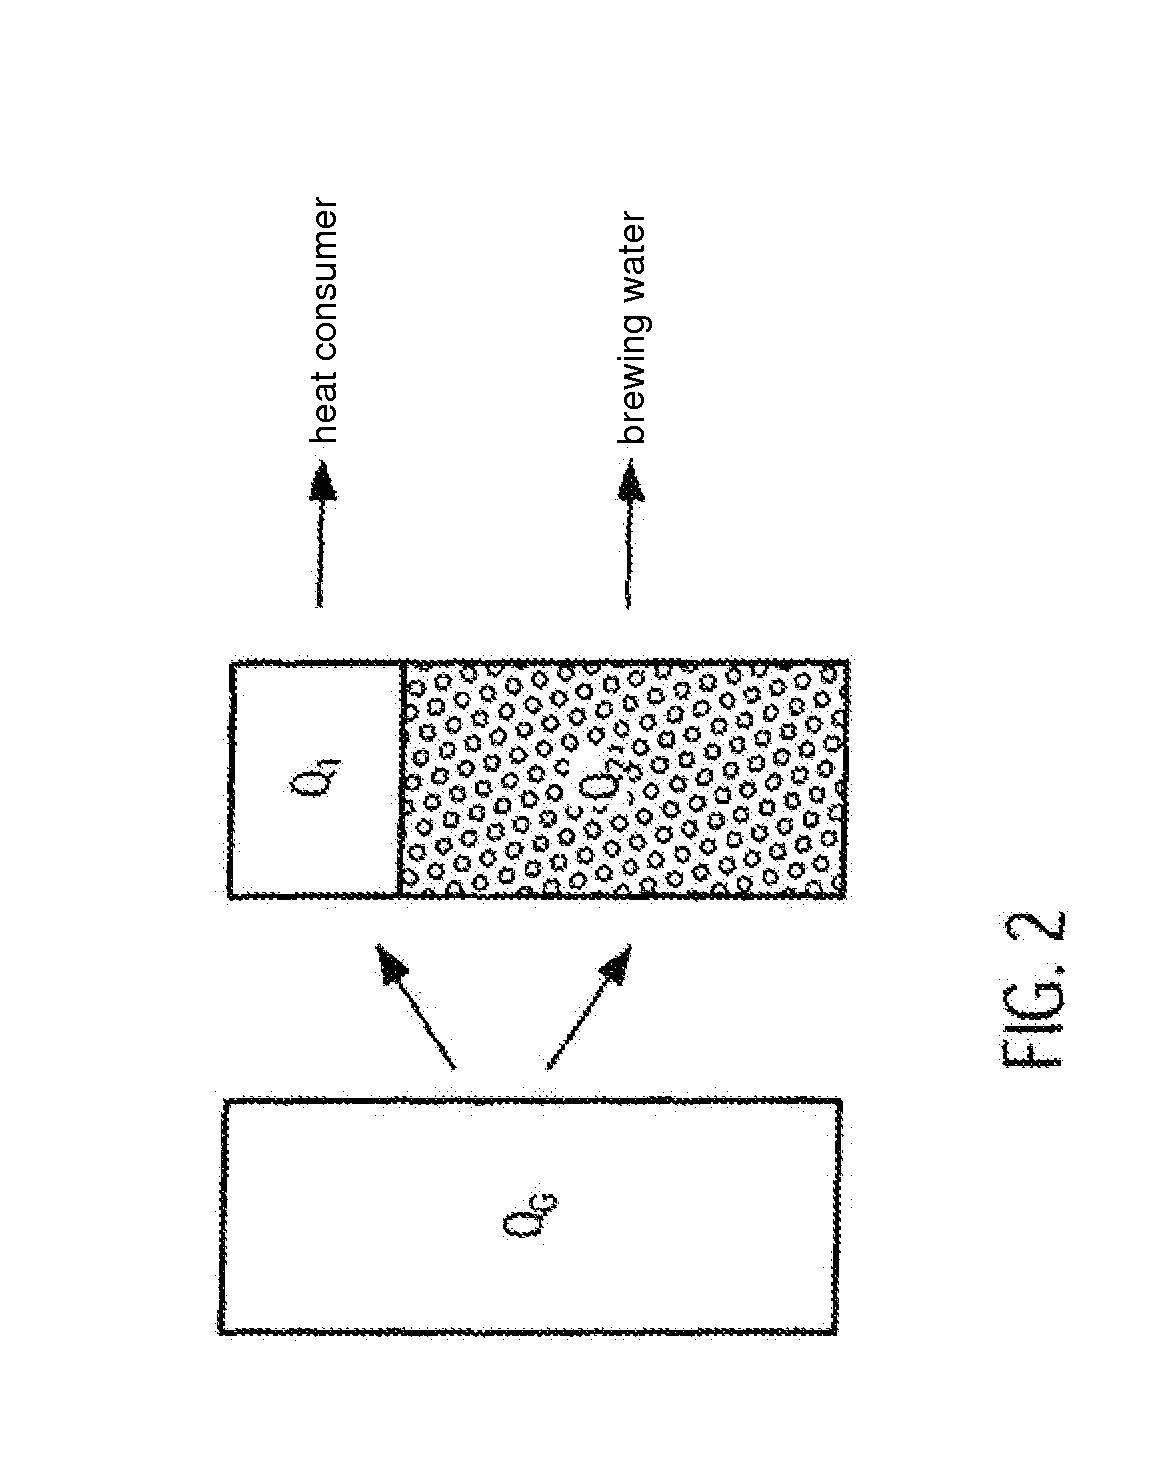 Apparatus and method for the recovery of energy